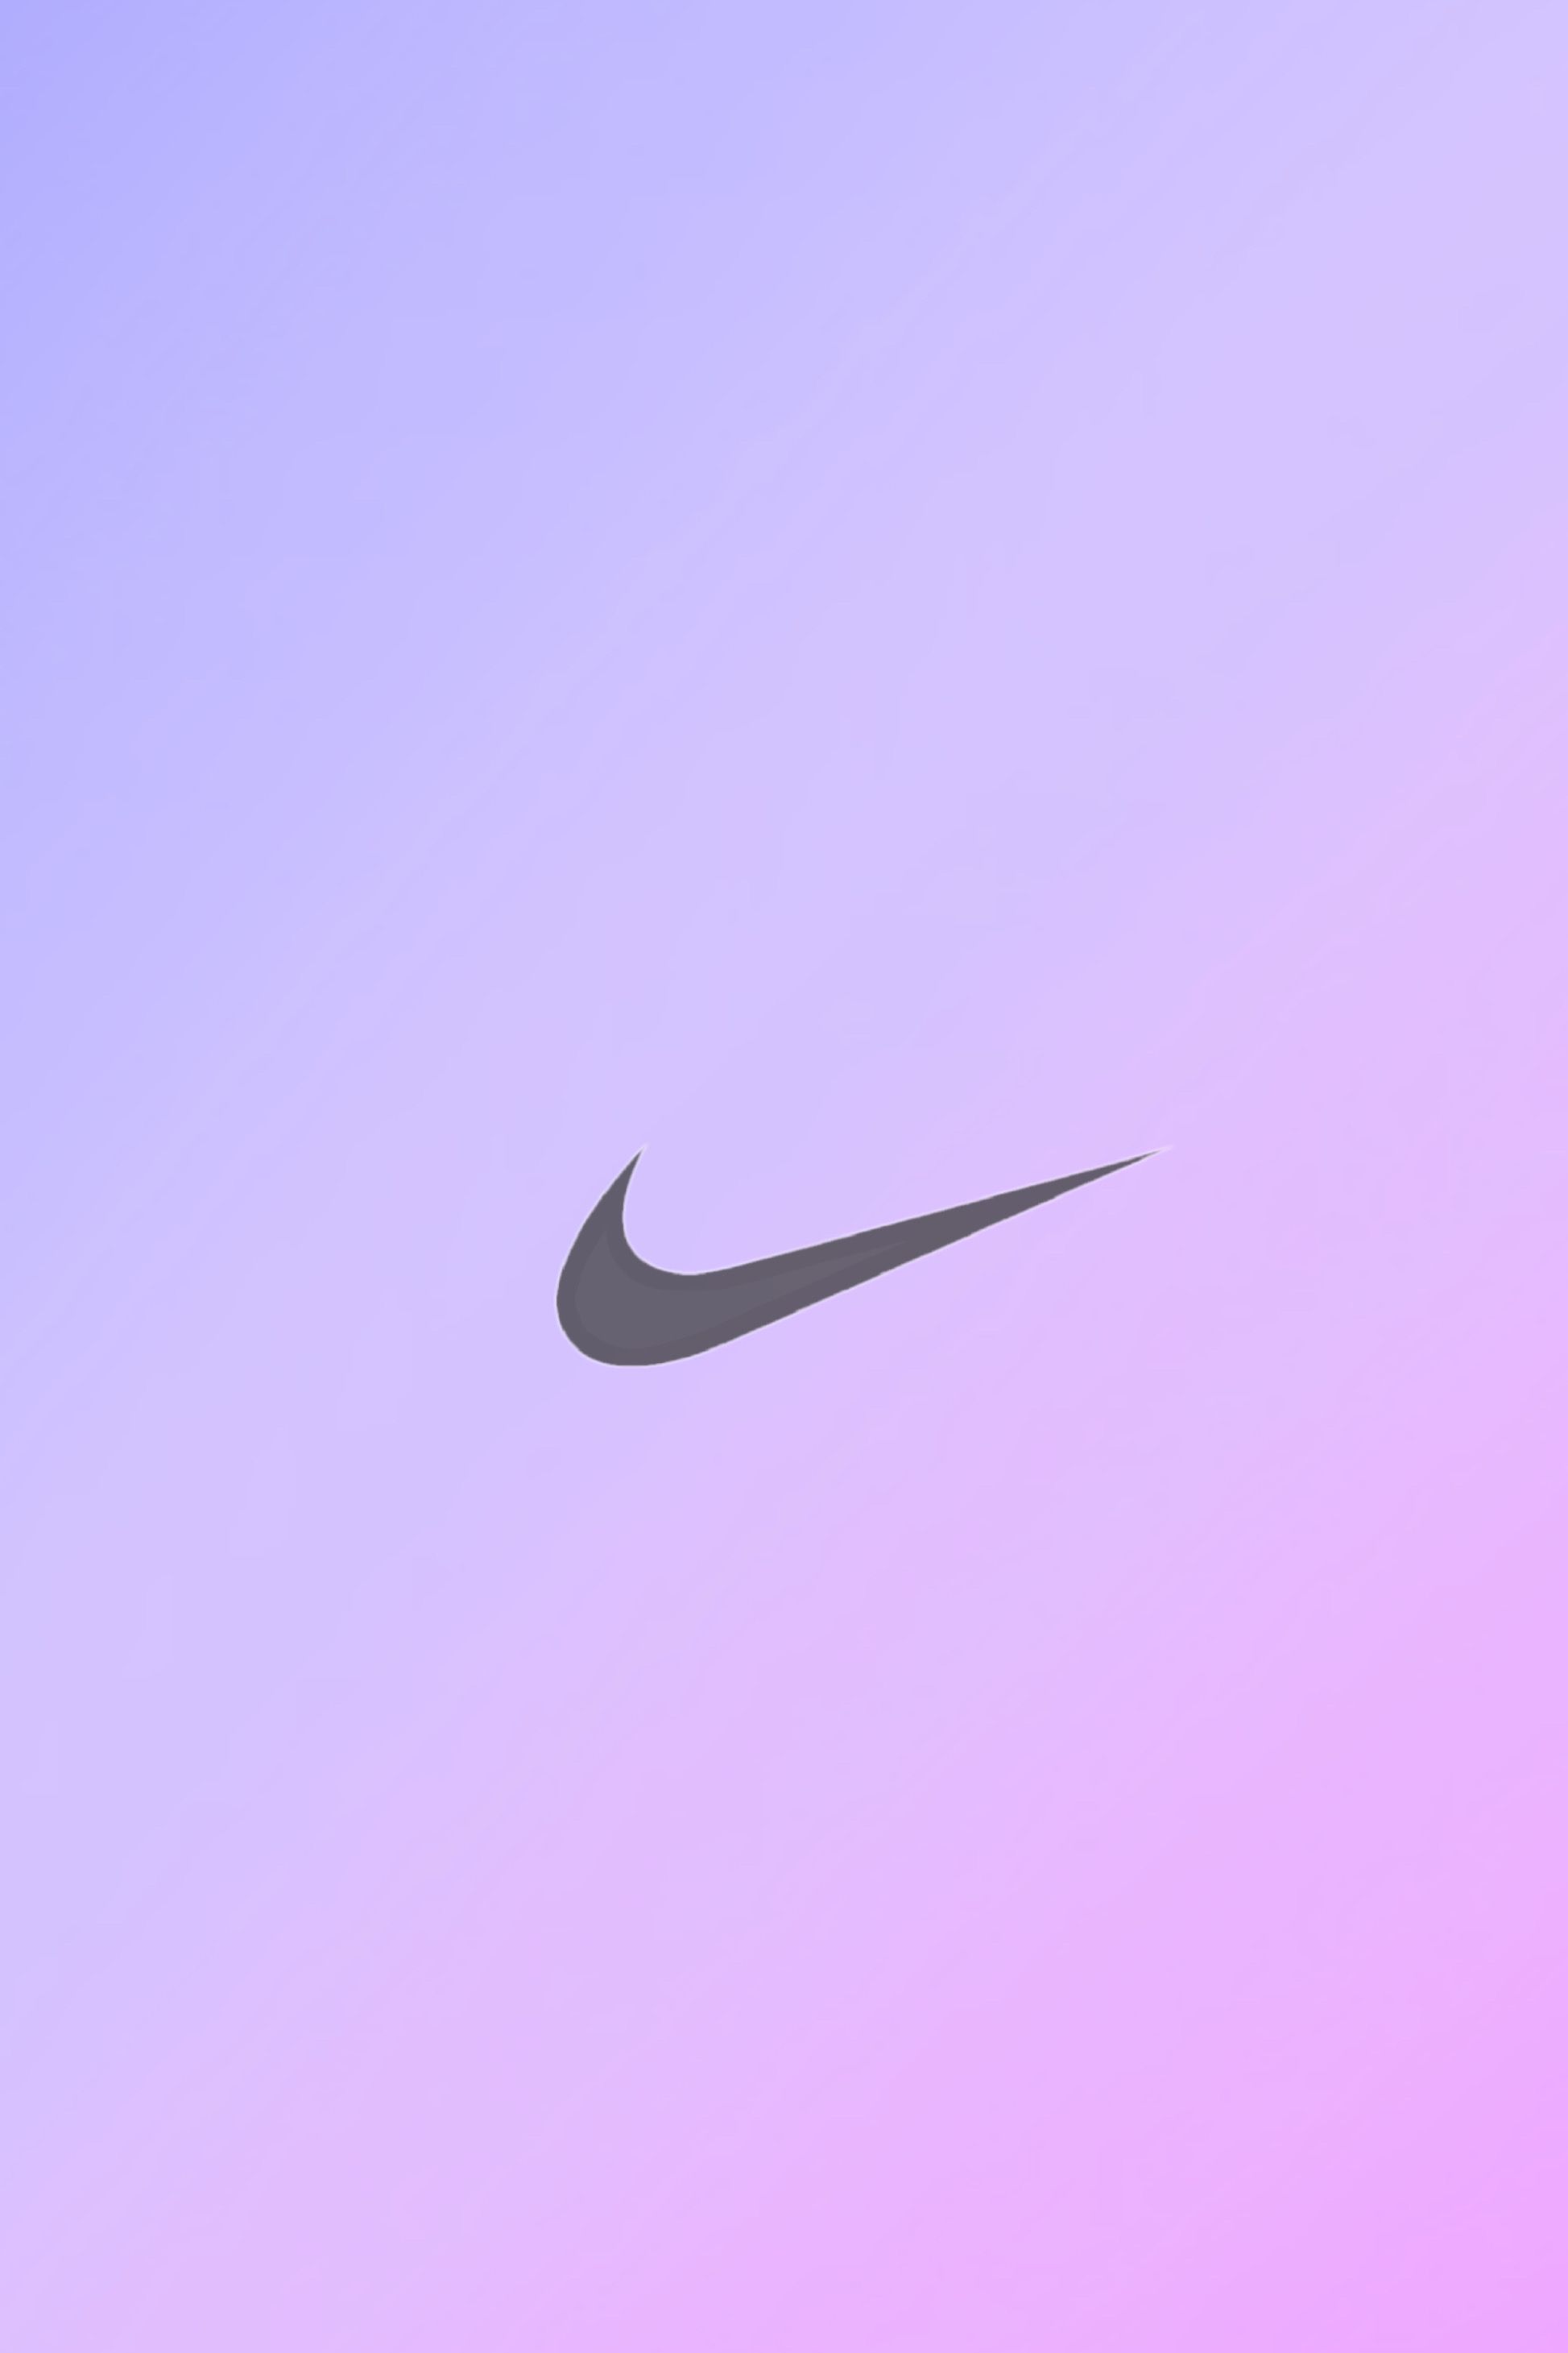 Ombré pink and purple Nike wallpaper. Pink nike wallpaper, Nike wallpaper, Cool nike wallpaper